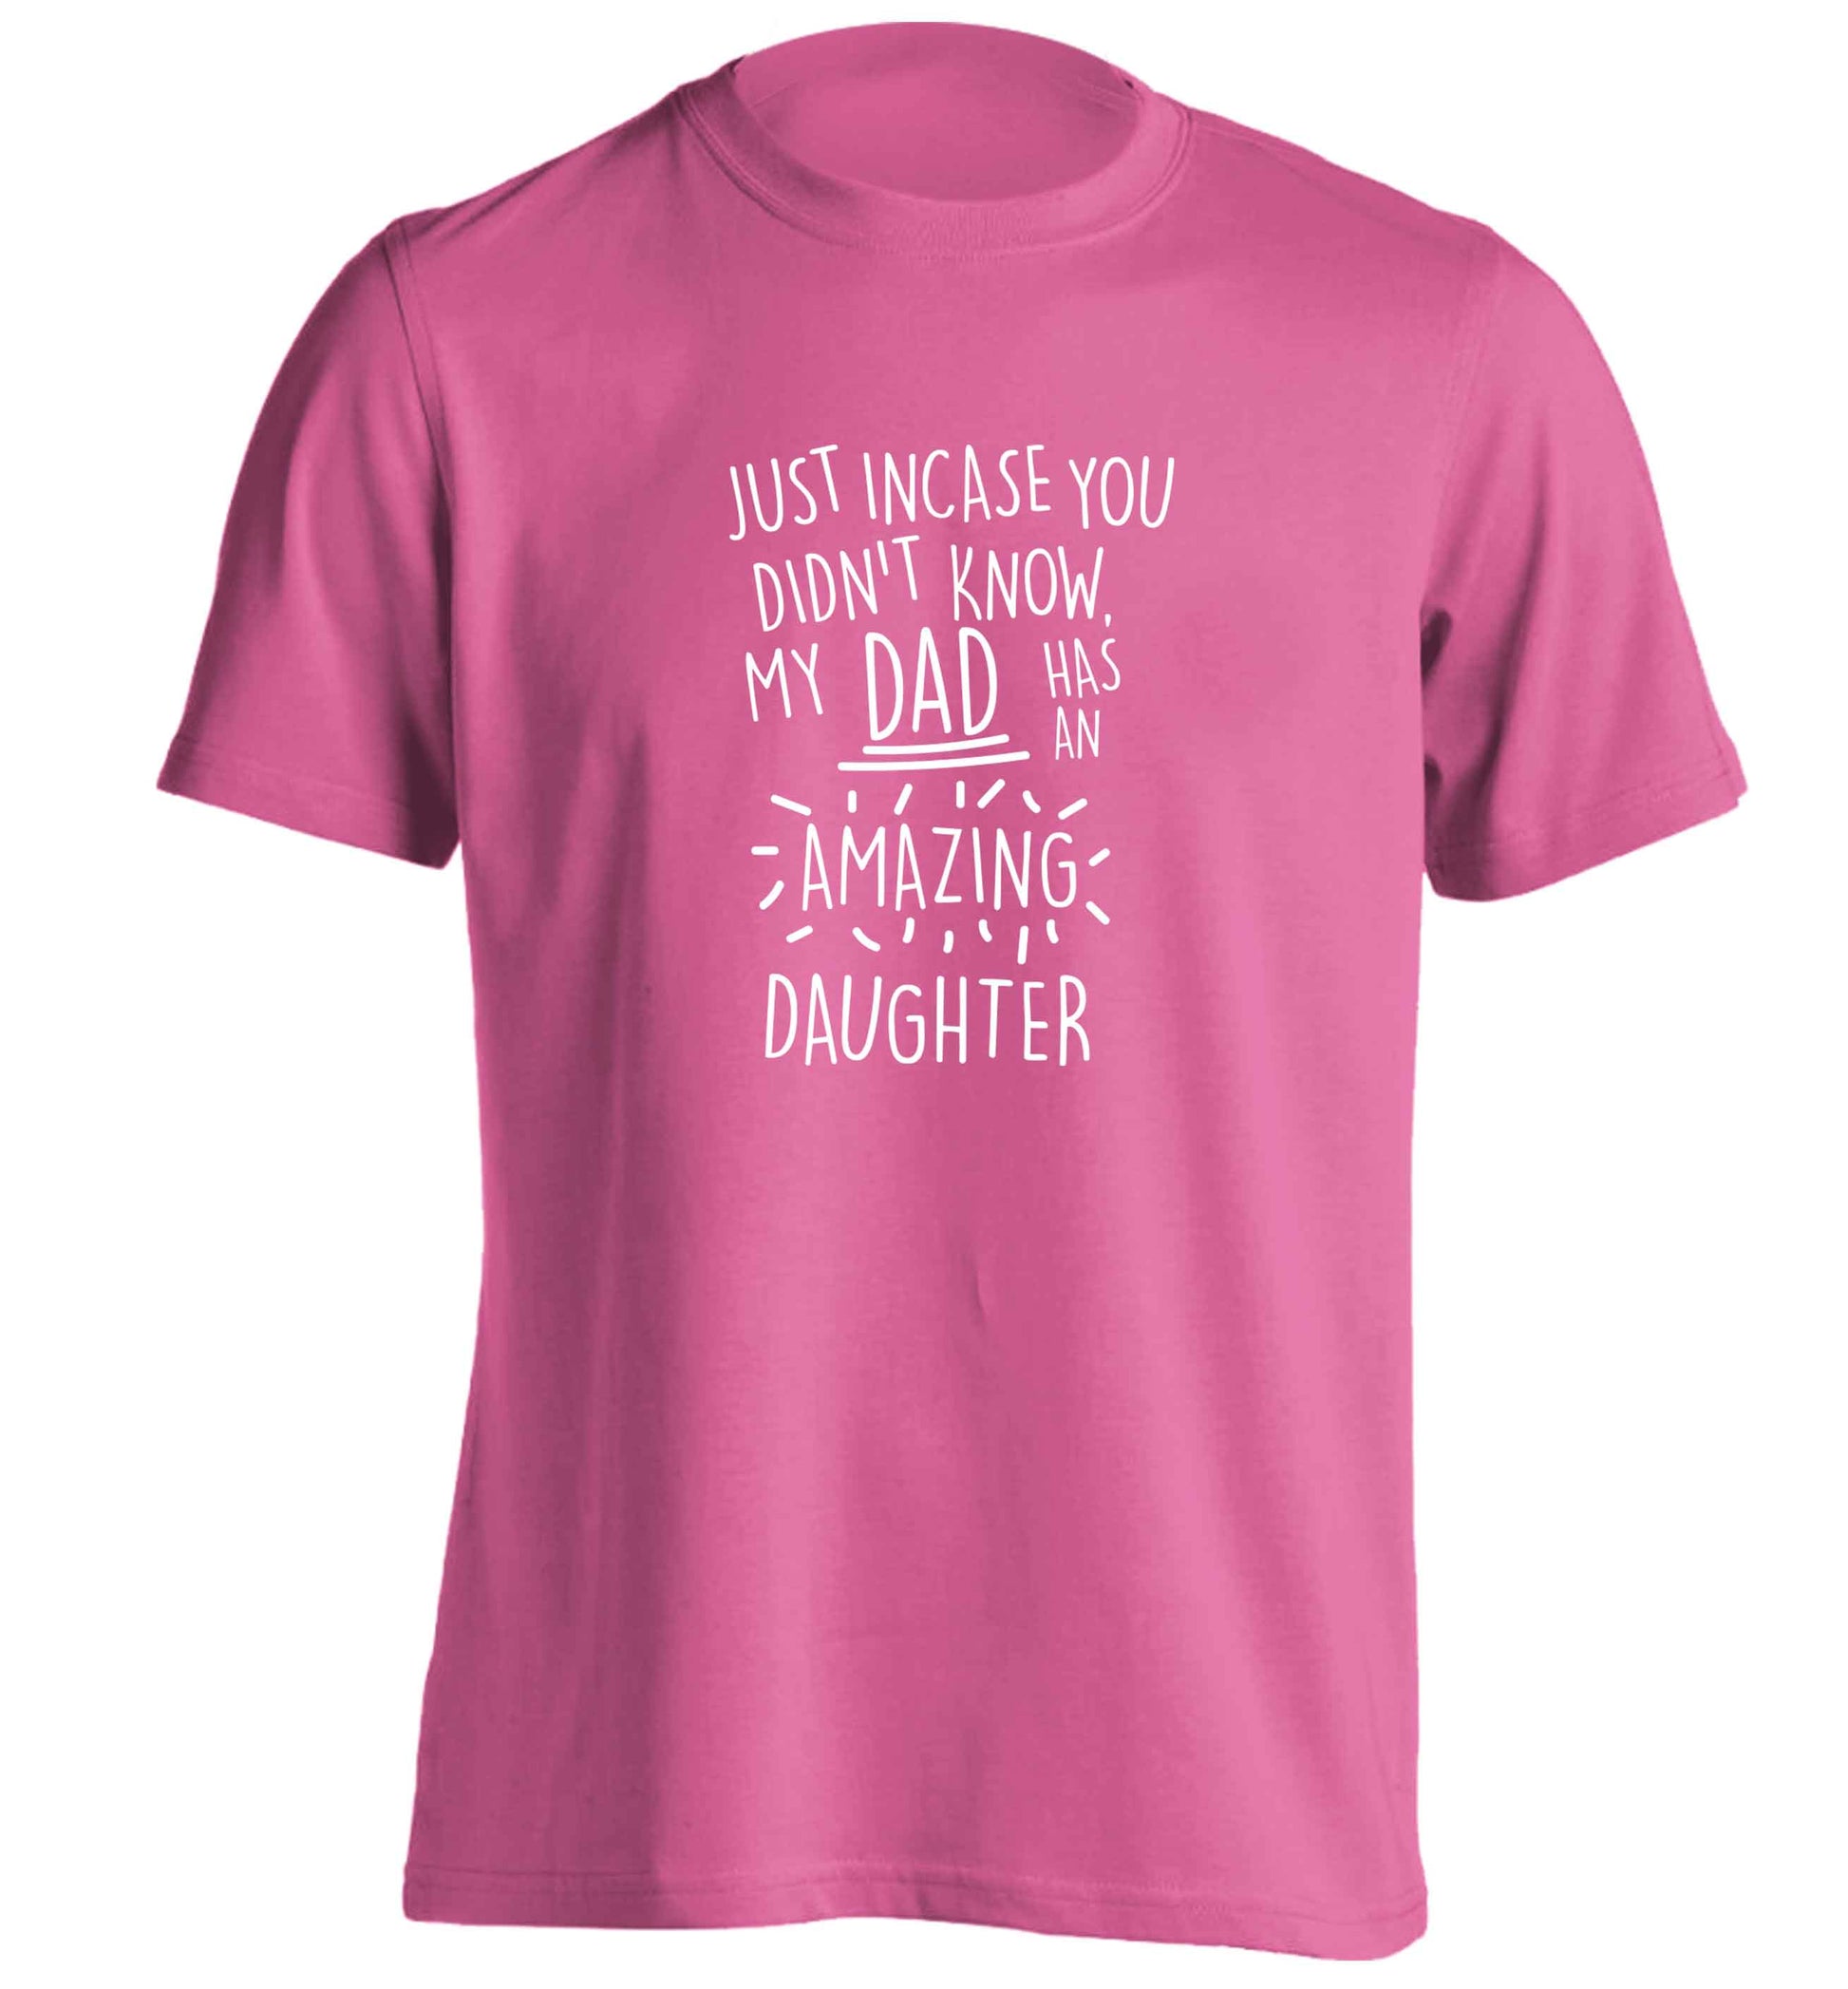 Just incase you didn't know my dad has an amazing daughter adults unisex pink Tshirt 2XL